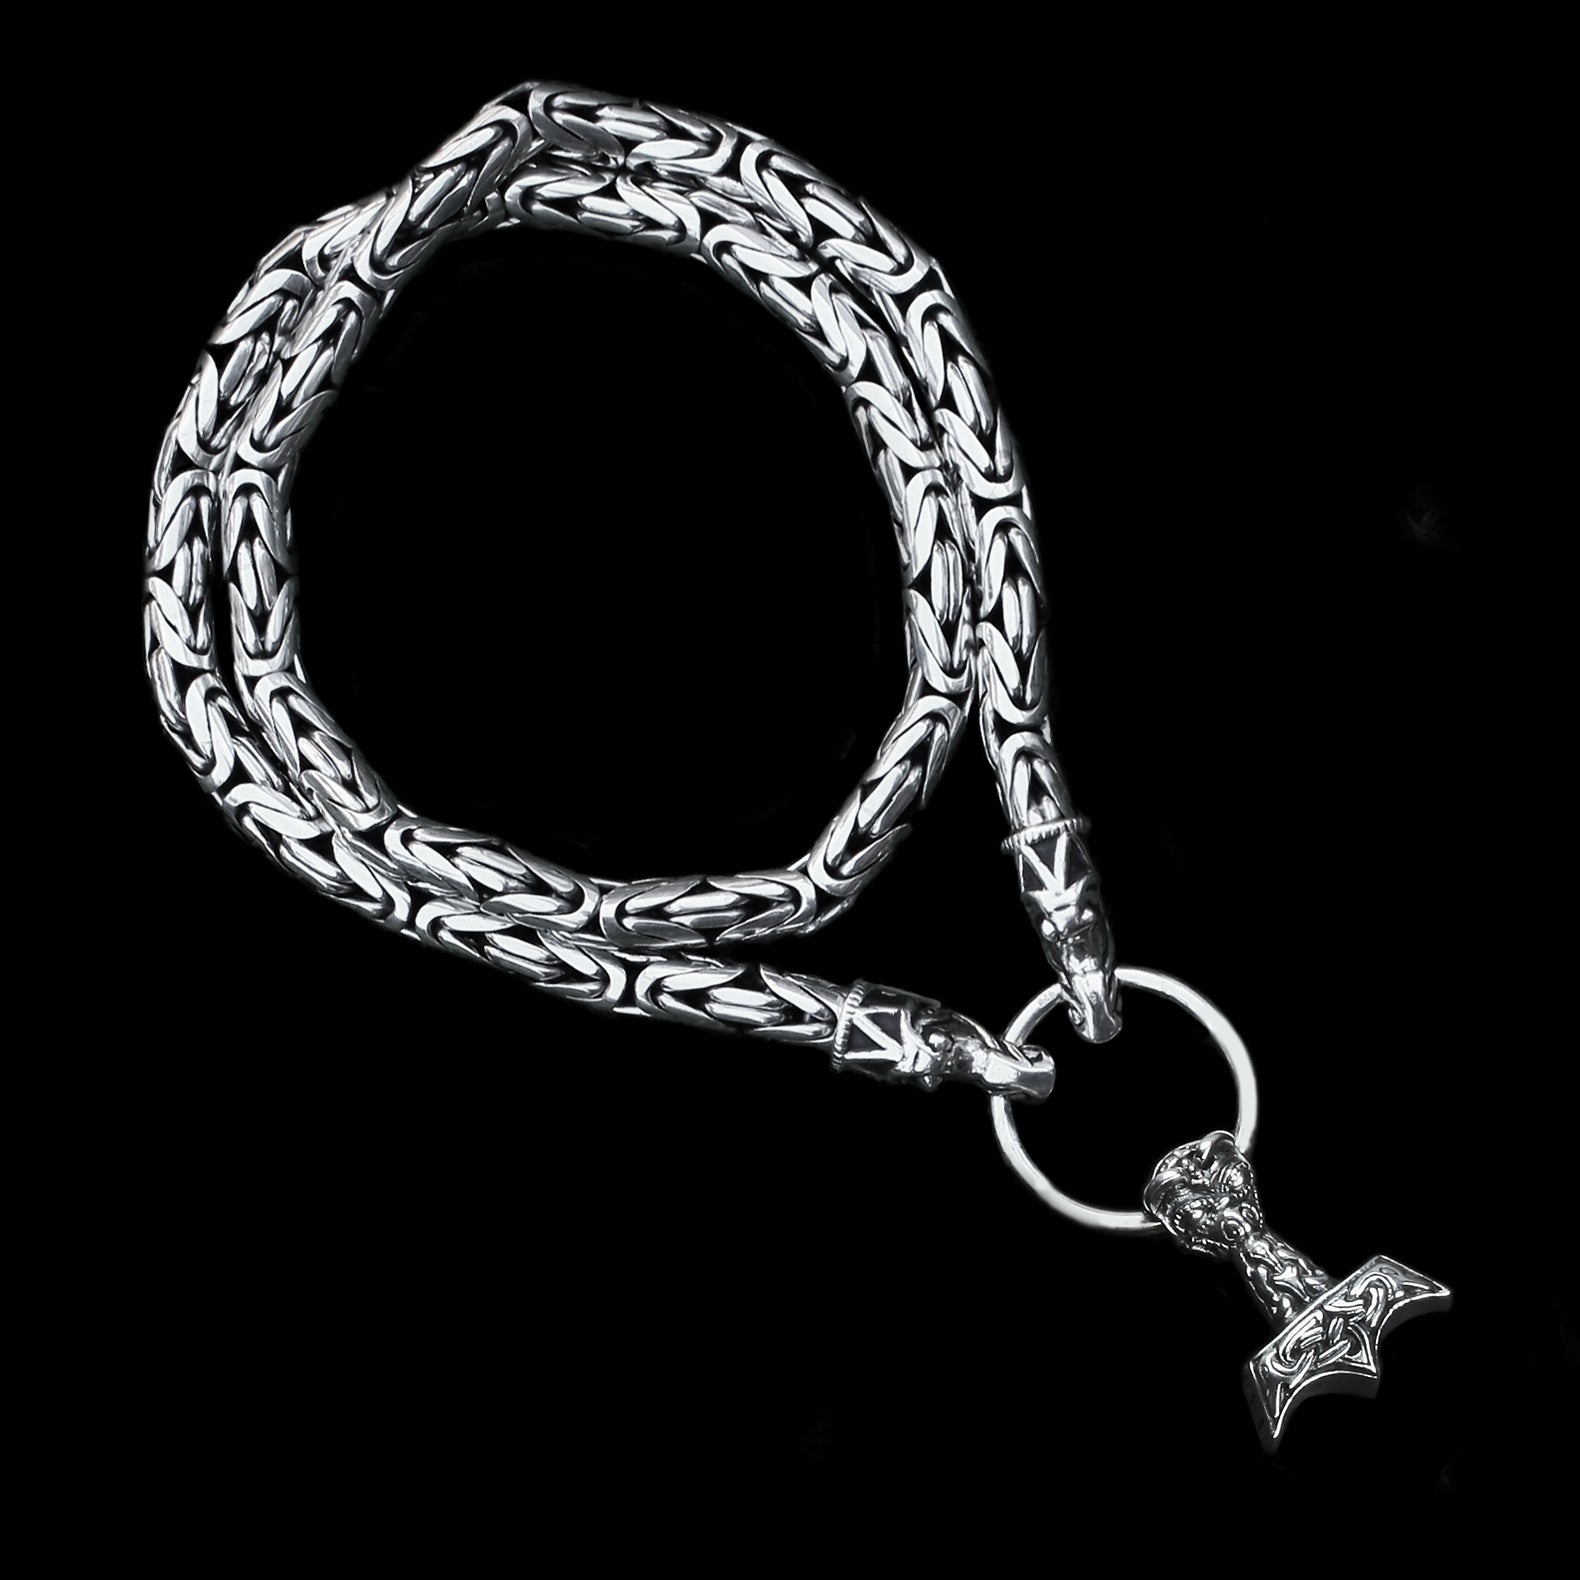 8mm Thick Silver King Chain Thors Hammer Necklace - Gotland Dragon Heads - Ferocious Beast Thors Hammer